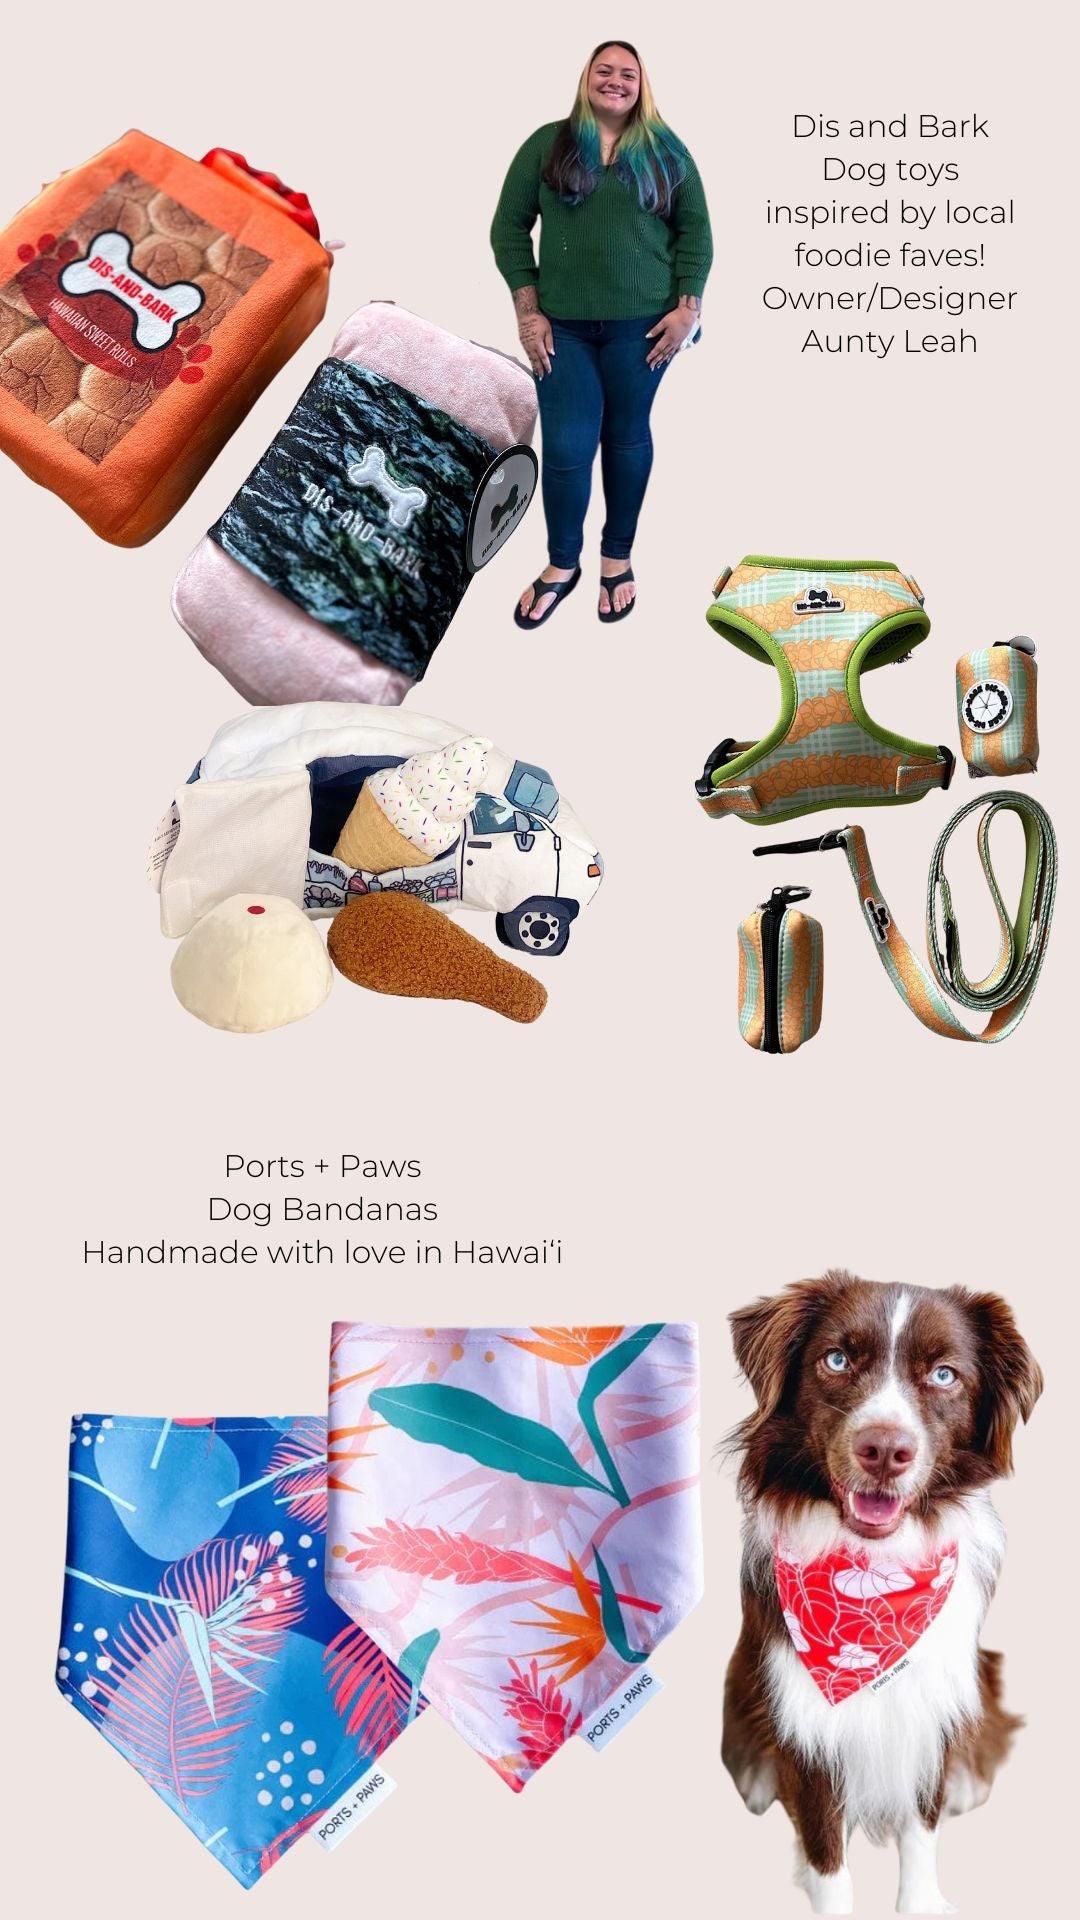 Hawaii pet brands including Dis and Bark and Ports and Paws